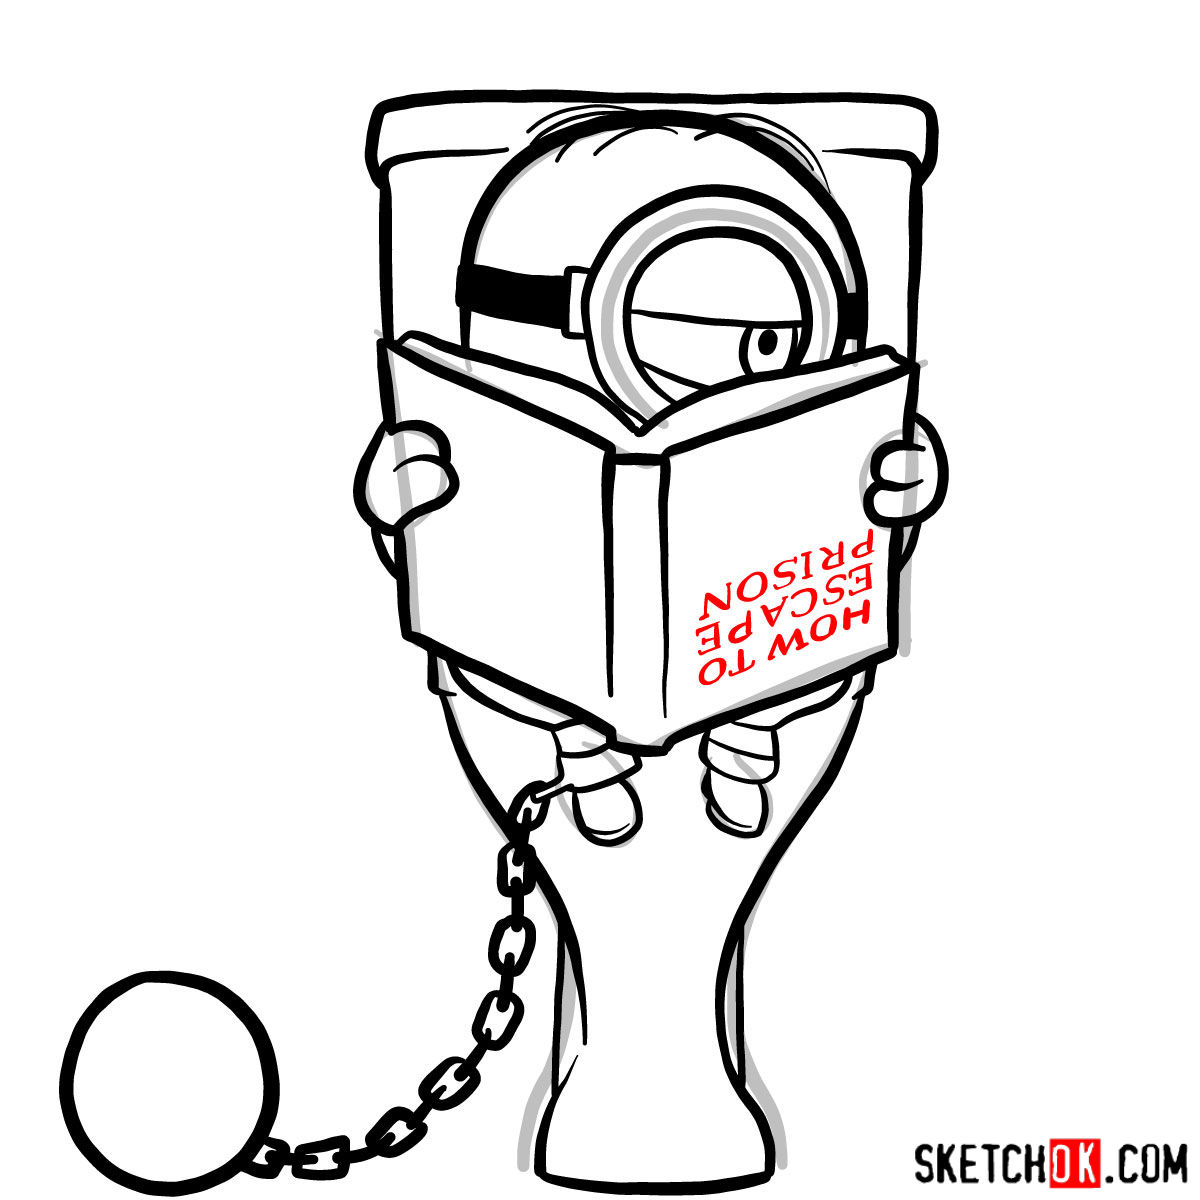 How to draw minion in the toilet reading a book - step 10